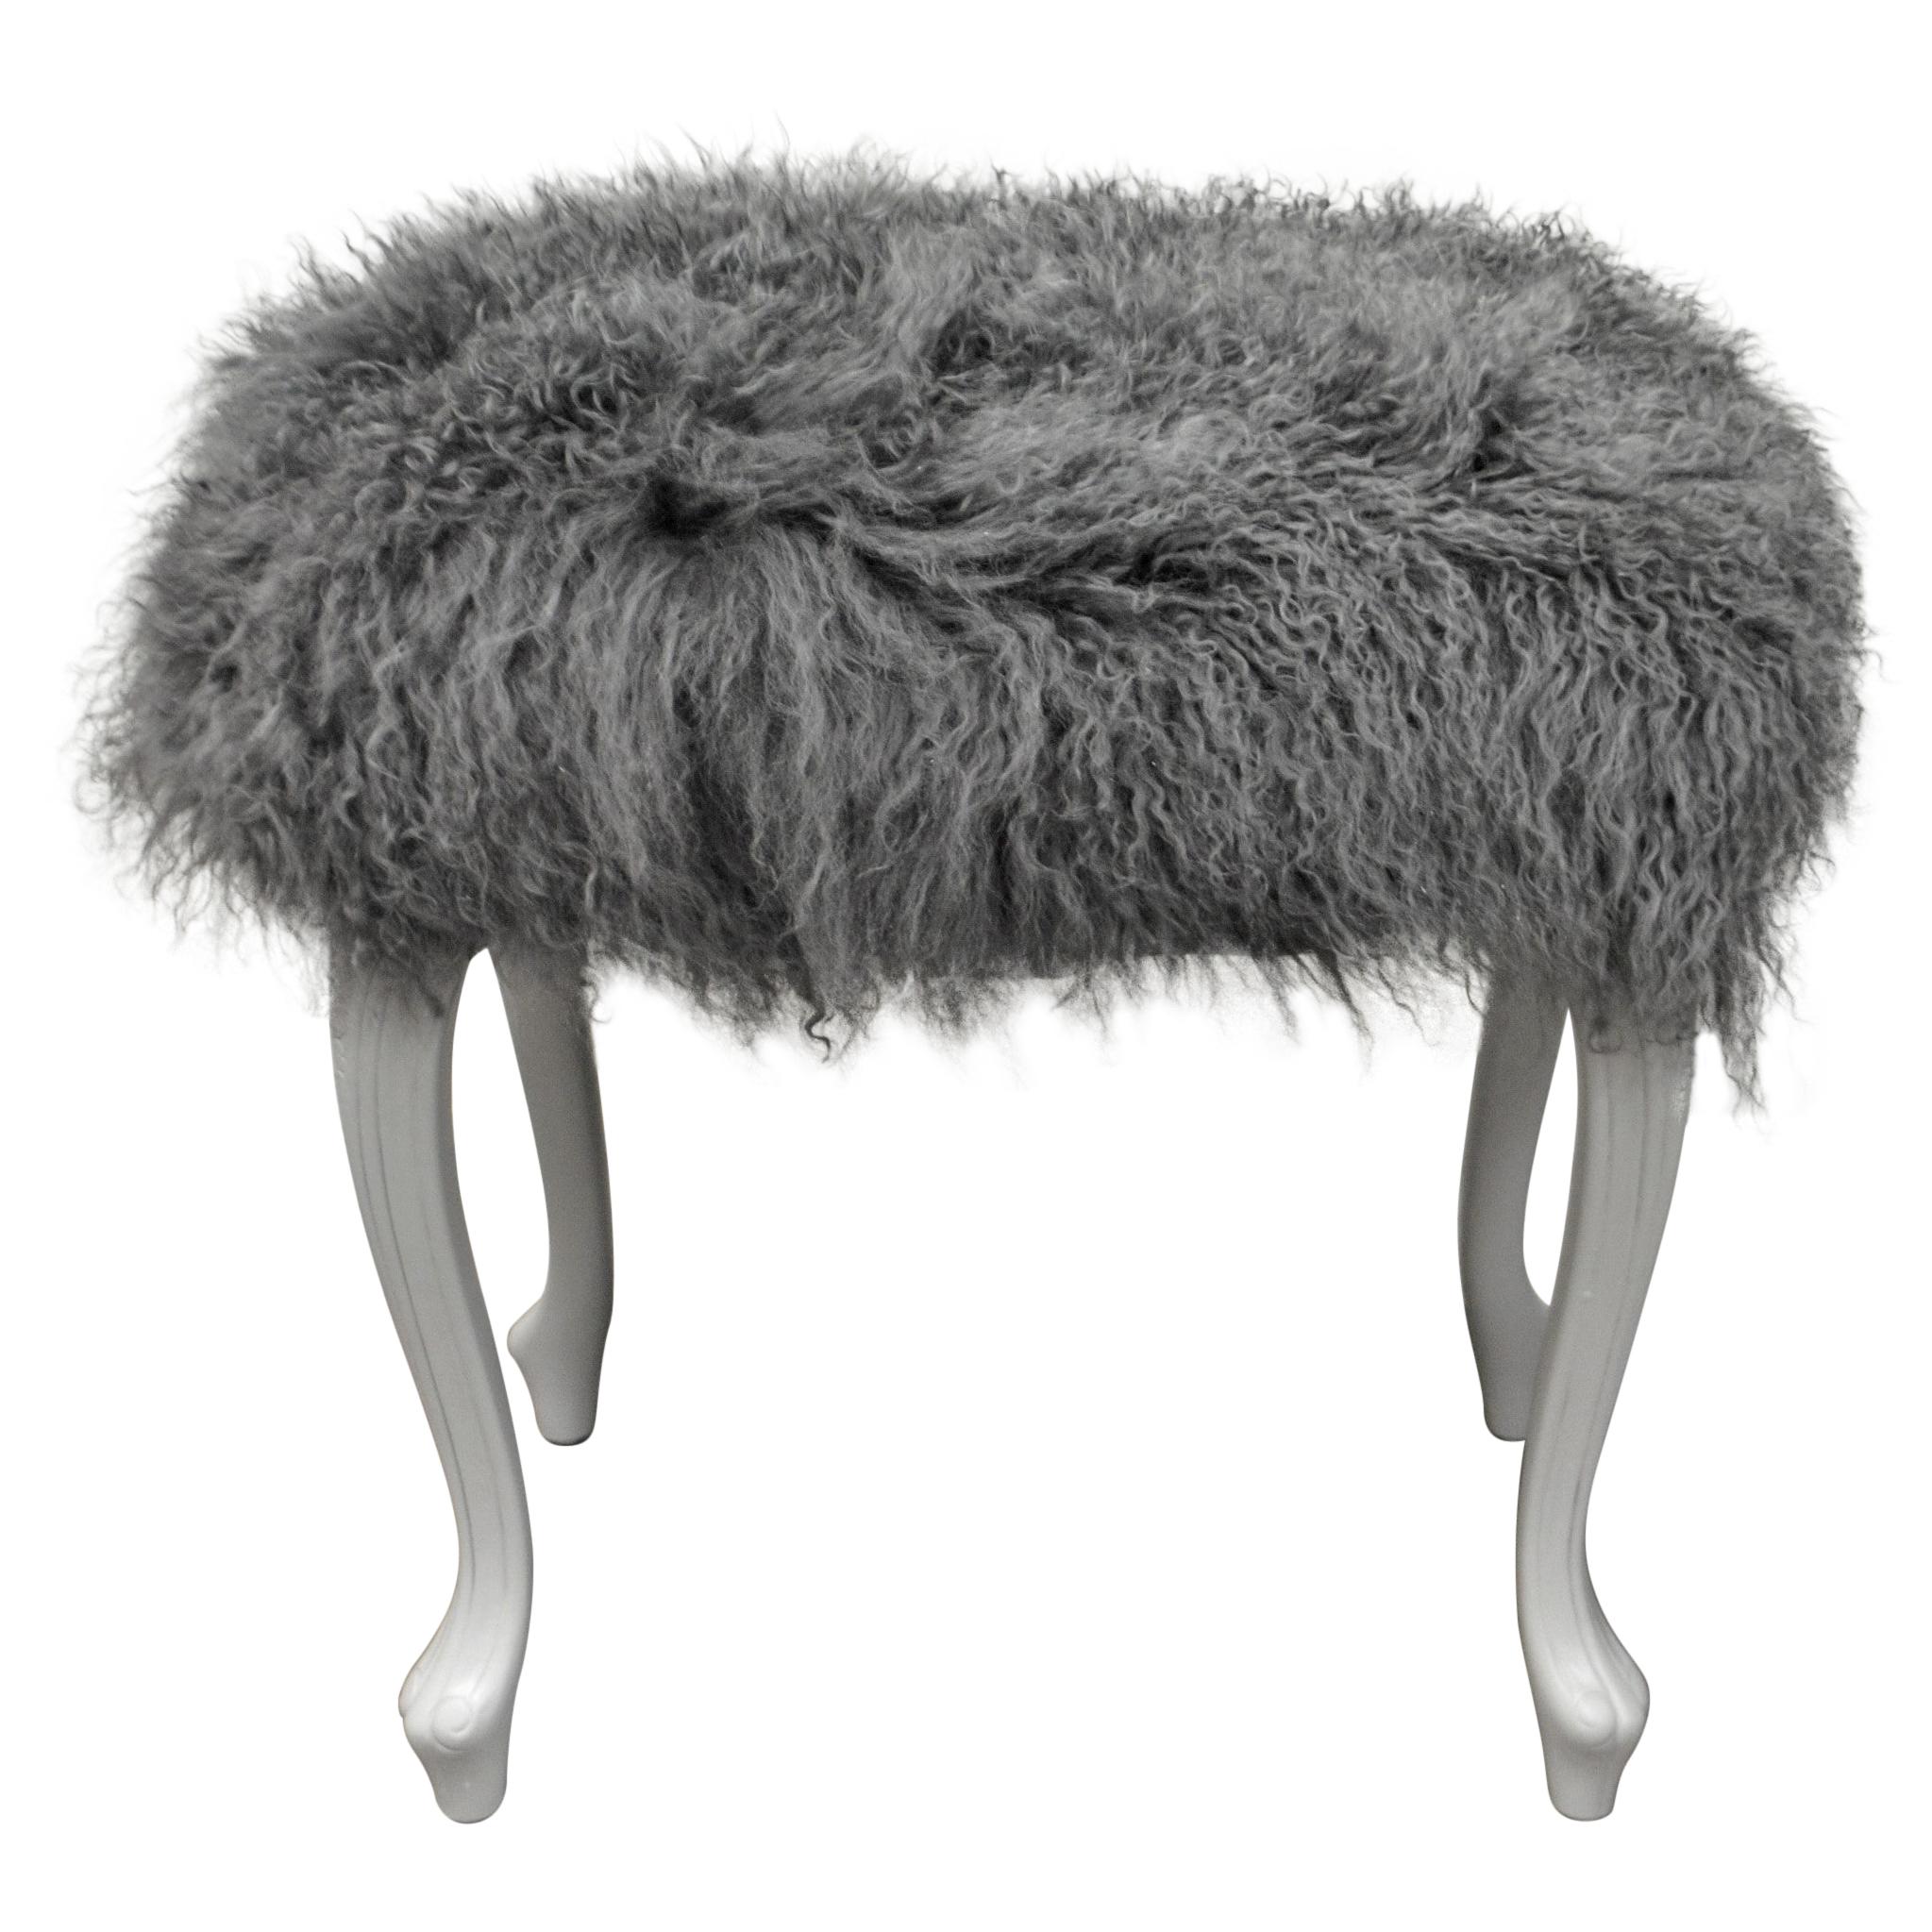 Wooden Painted Bench Upholstered with a Grey Curly Lamb's Wool For Sale